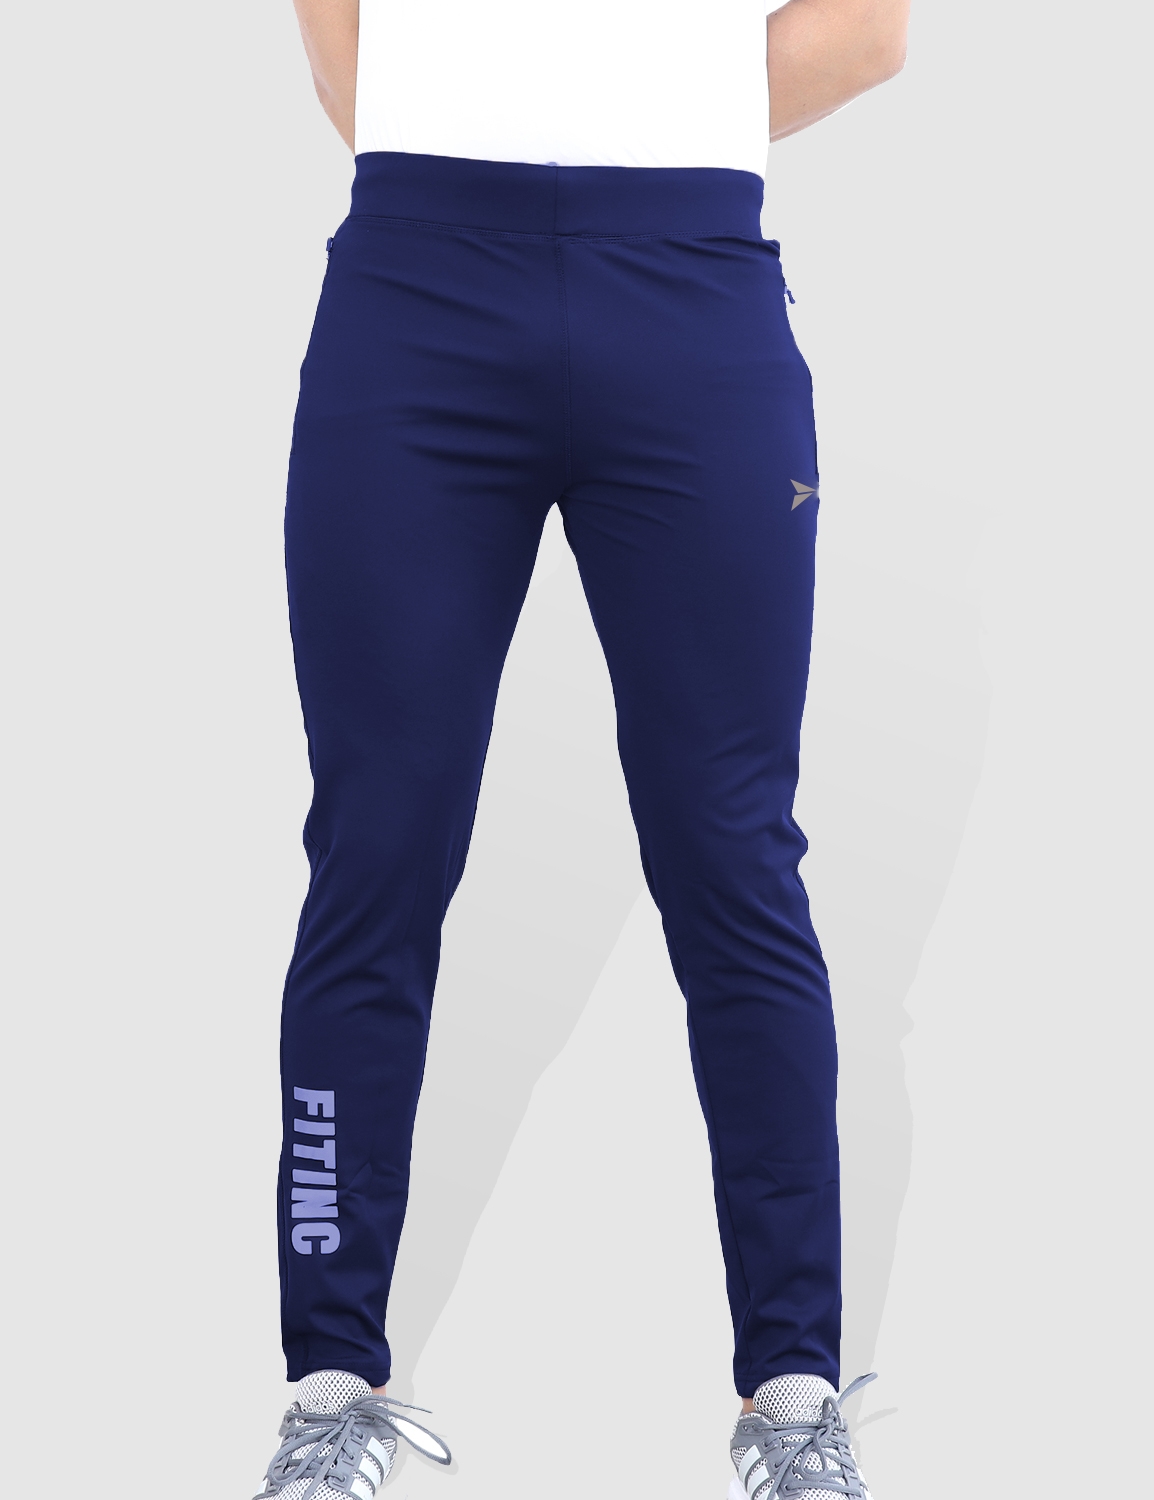 Fitinc | Fitinc Slim Fit Airforce Track Pant for Gym & Yoga with Zipper Pockets